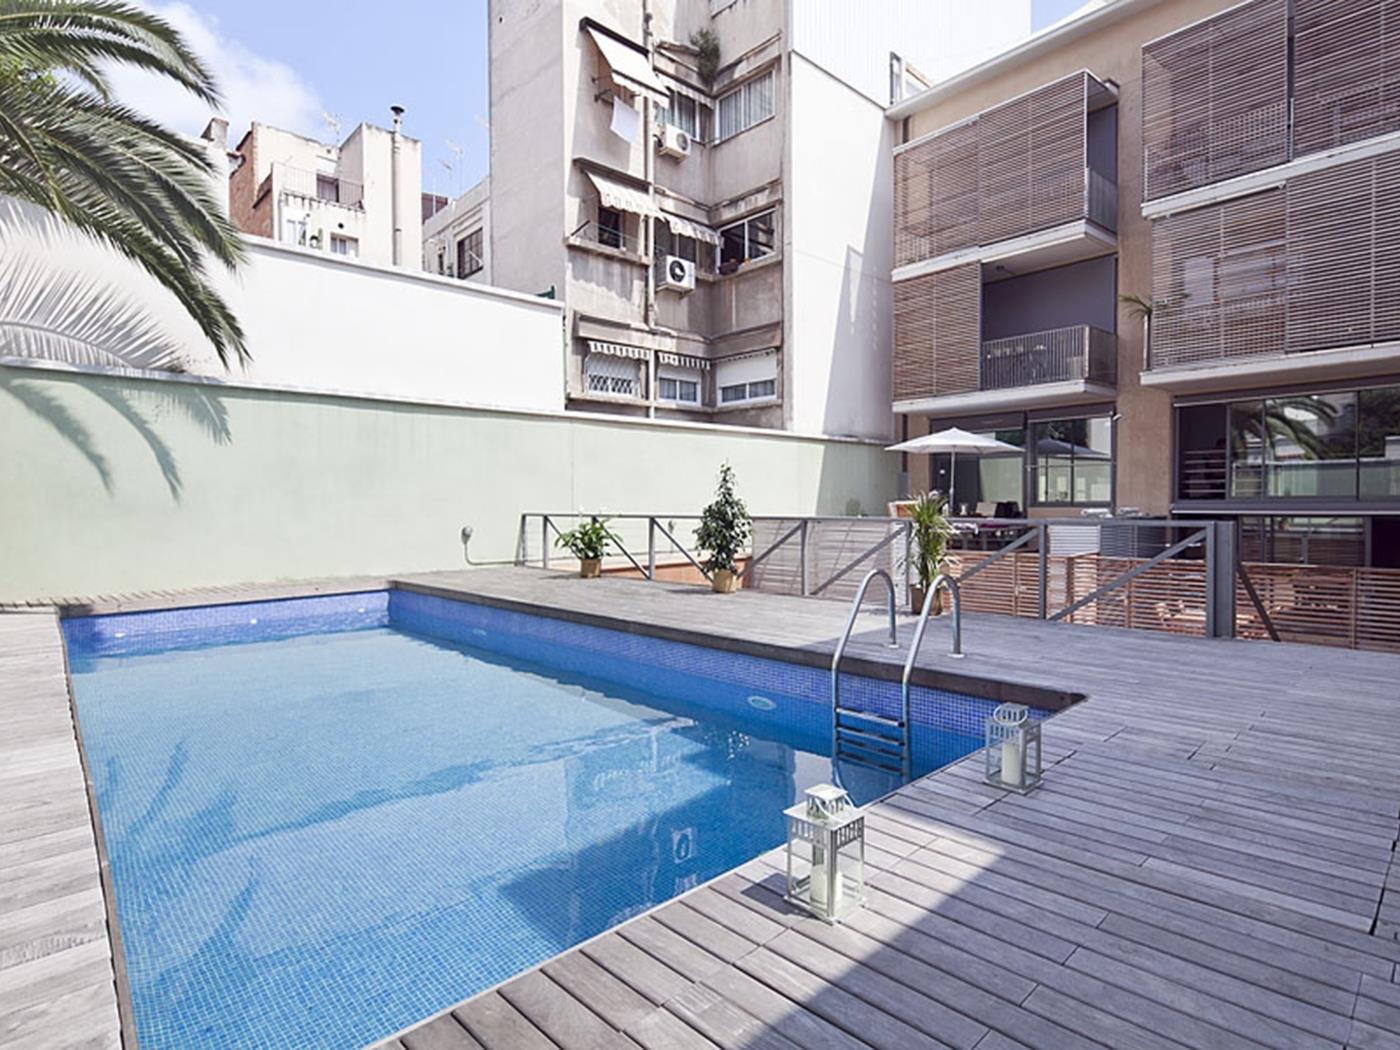 Apartment with Terrace and Pool in Sagrada Familia - My Space Barcelona Aпартаменты